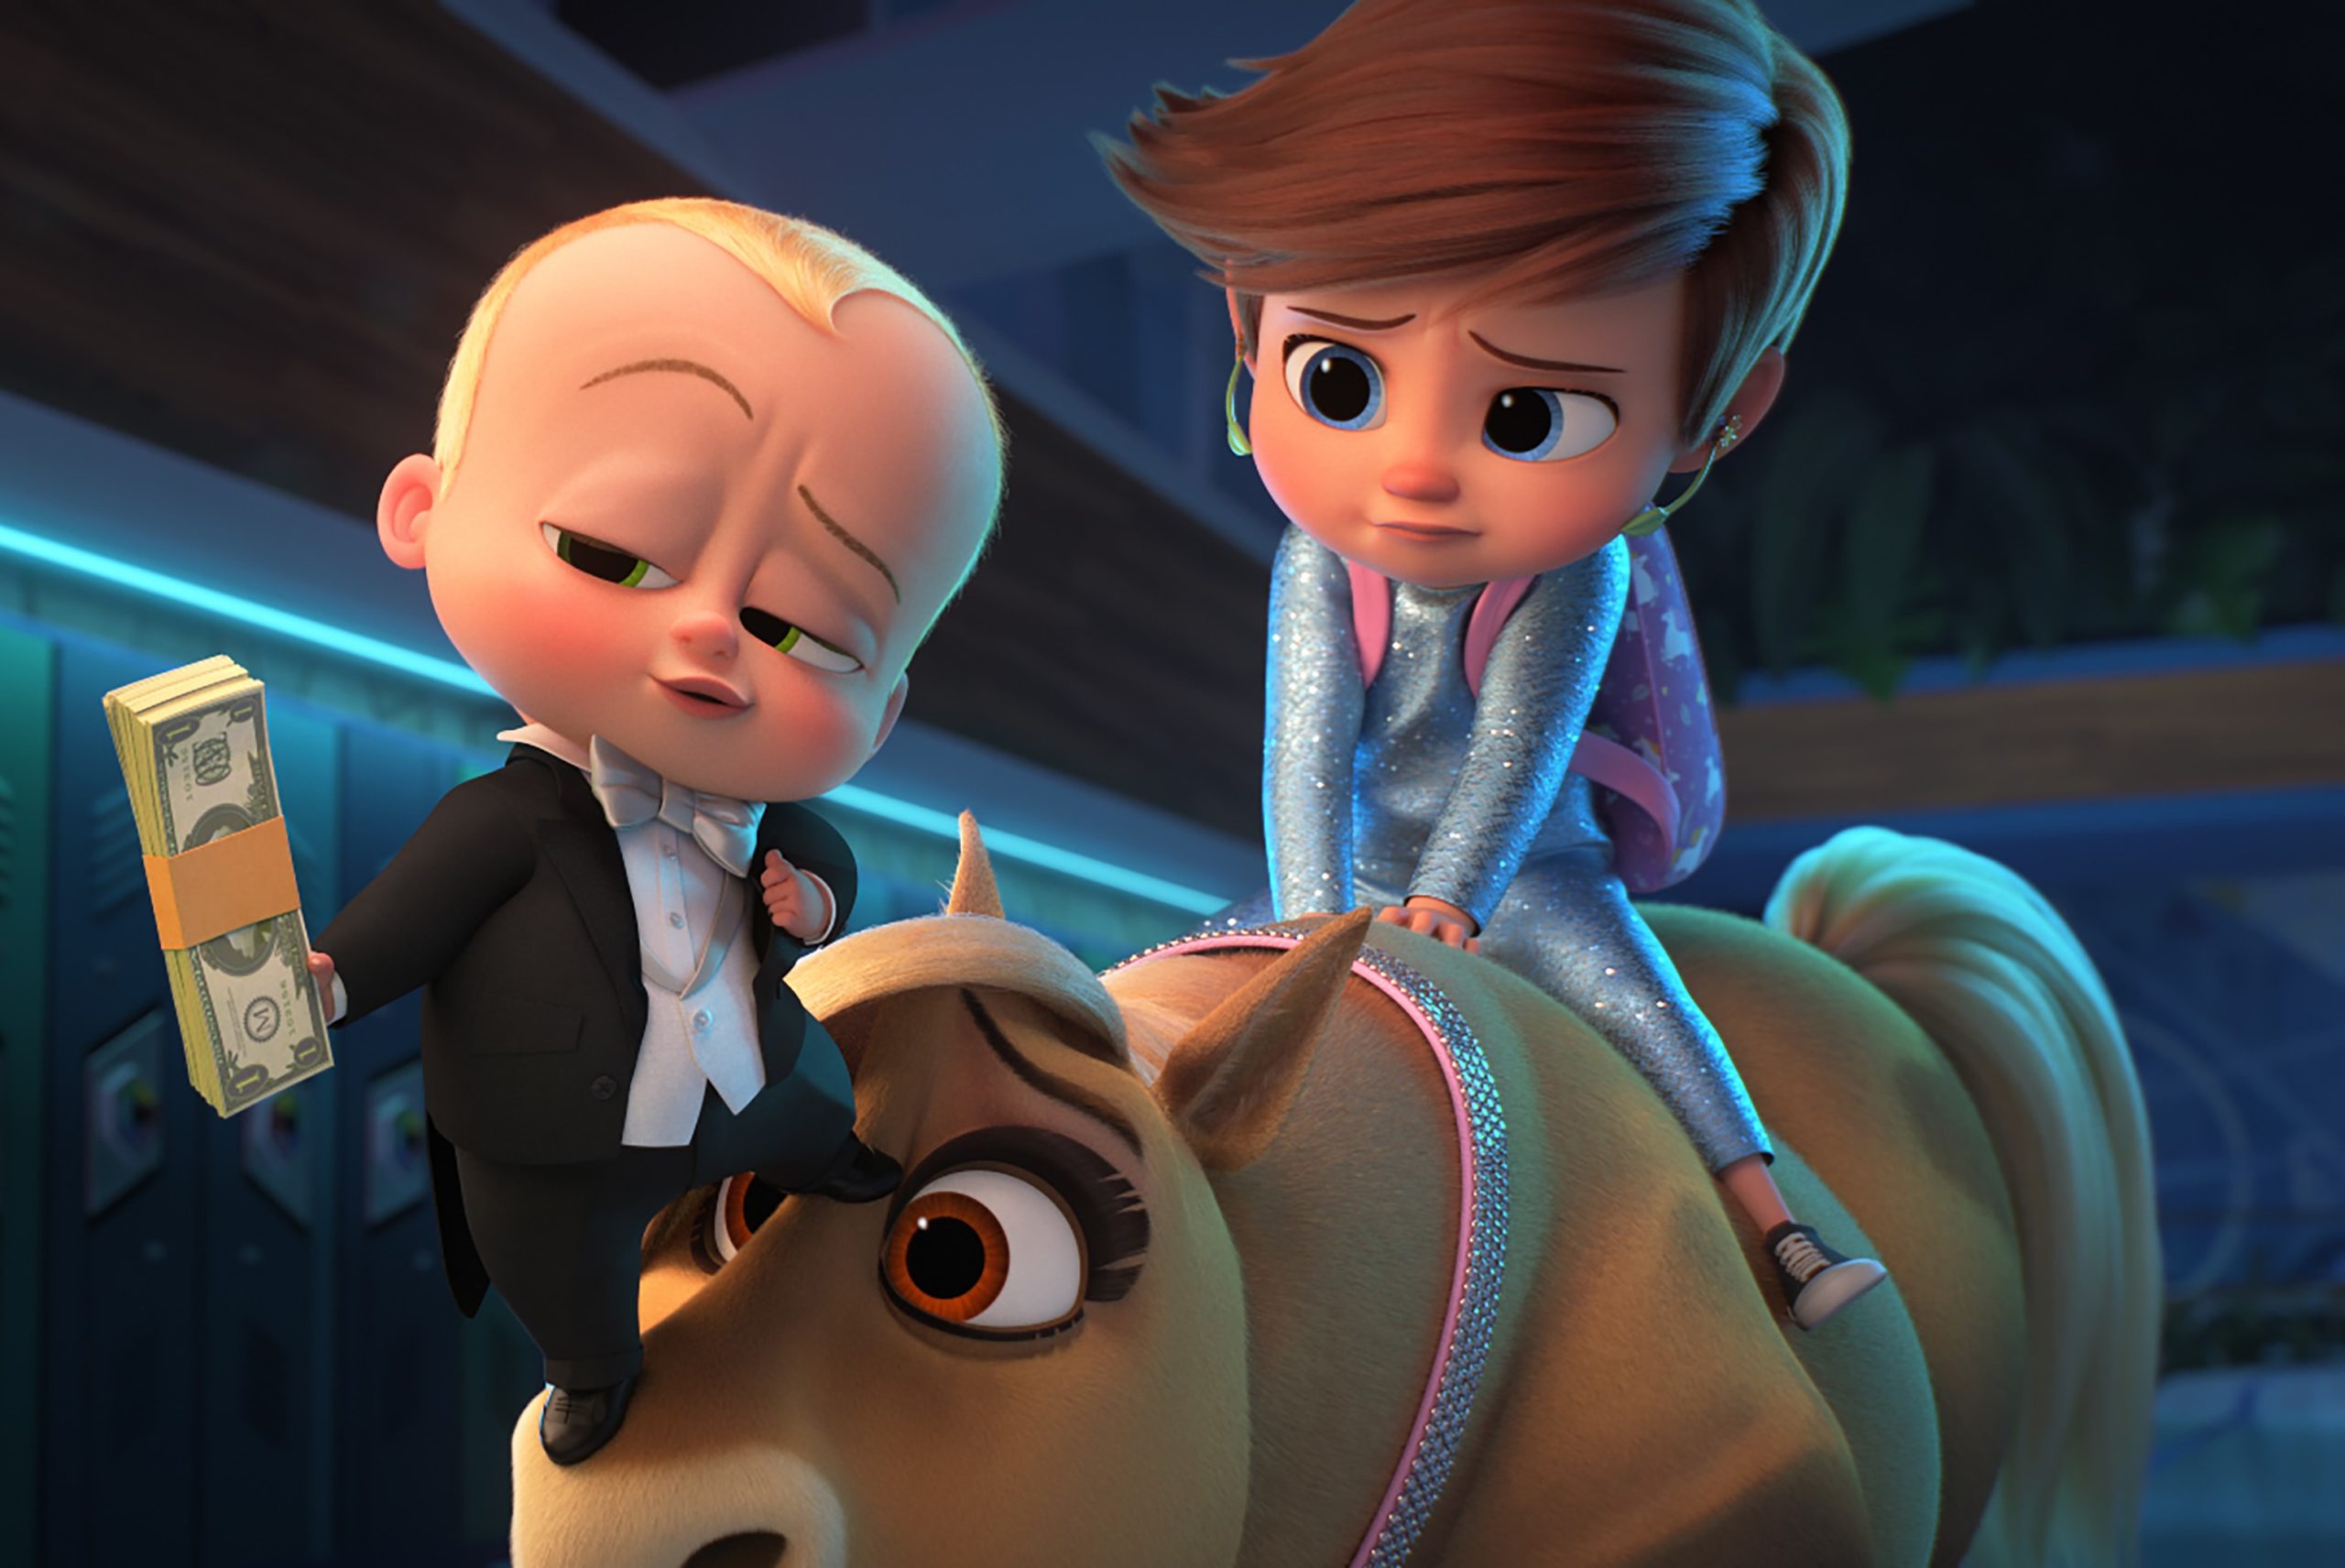 The Boss Baby: Family Business Trailer Has Adults Transformed Back To Children For Another Mission